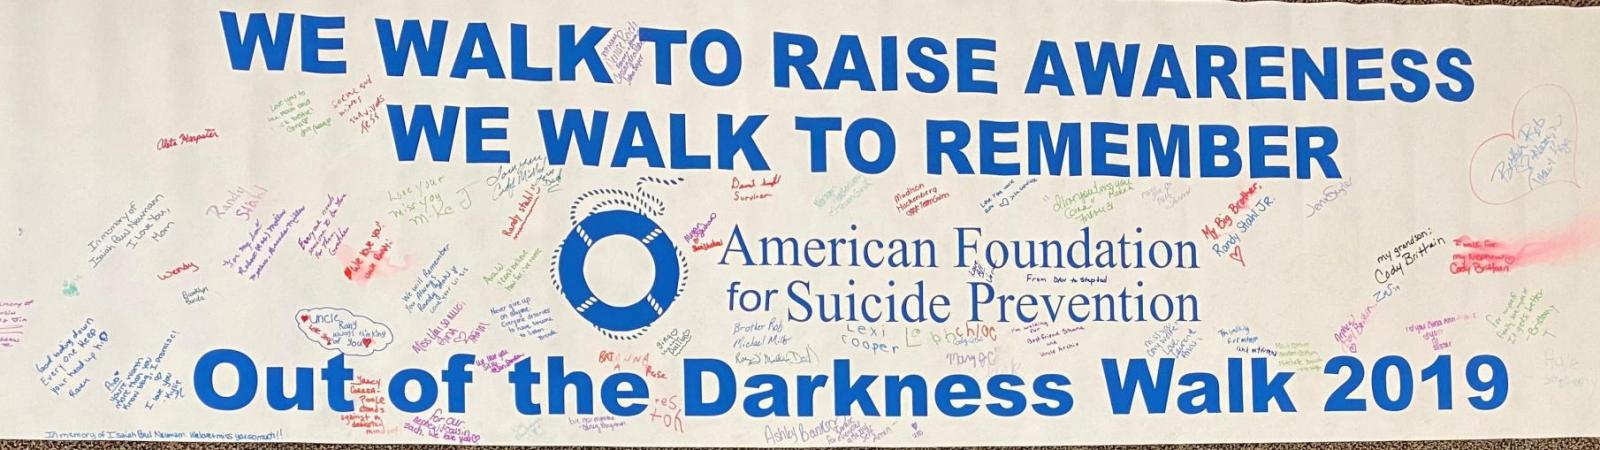 Out of the Darkness Banner 2019